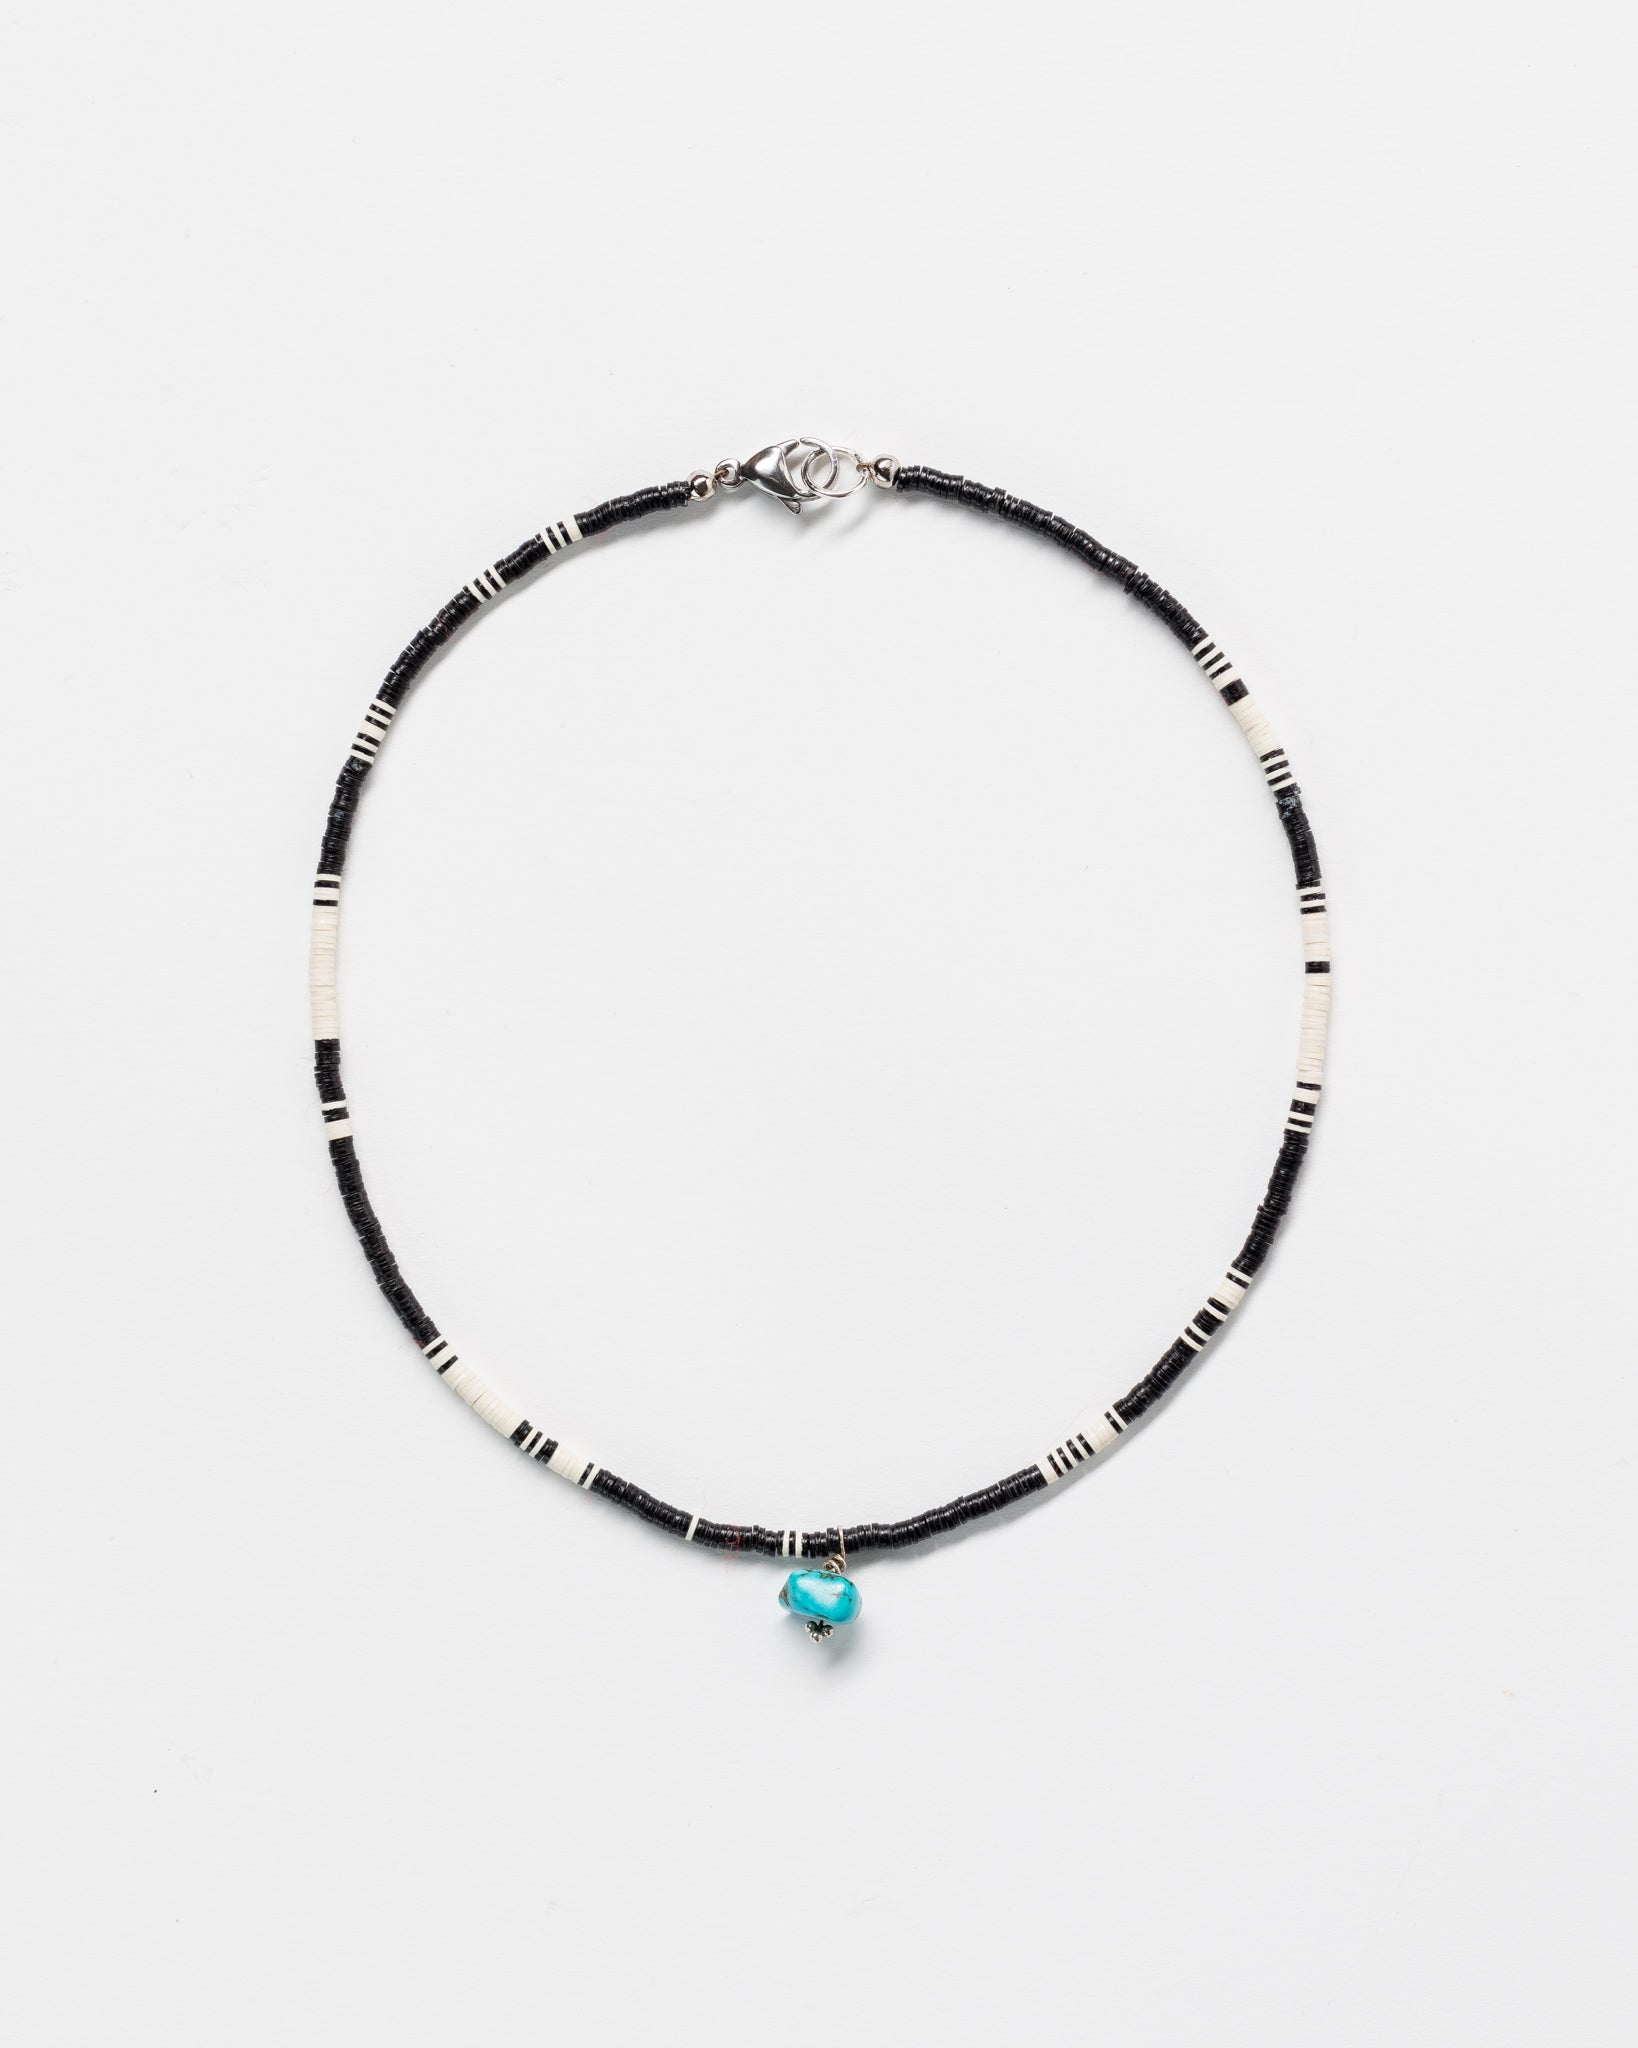 A simple necklace with alternating black and white beads and a single turquoise bead centered below, set against a plain white background, evokes traditional Arizona style.